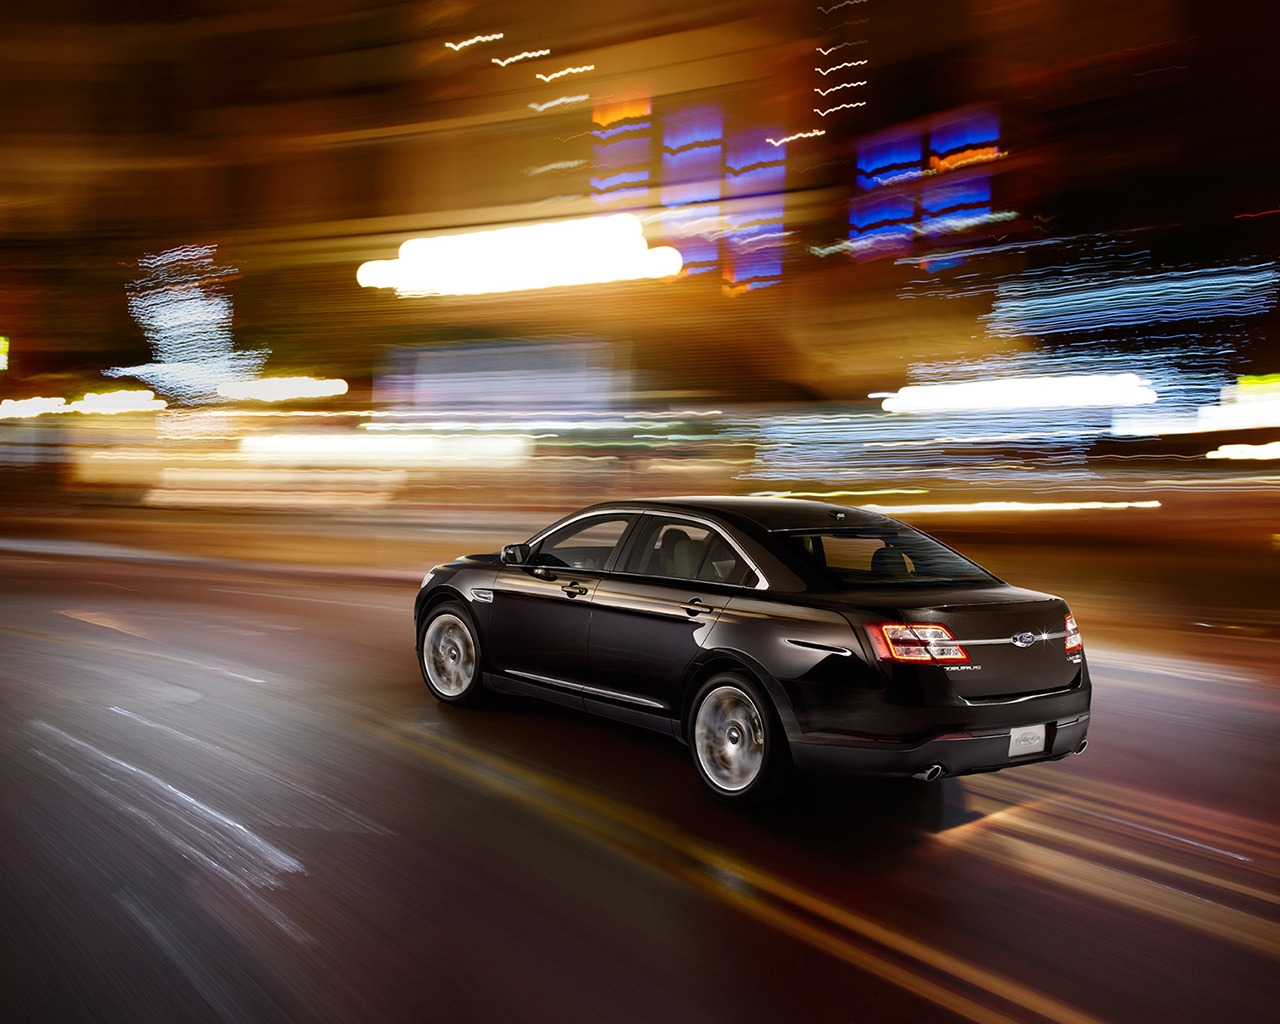 2013 Ford Taurus for 1280 x 1024 resolution